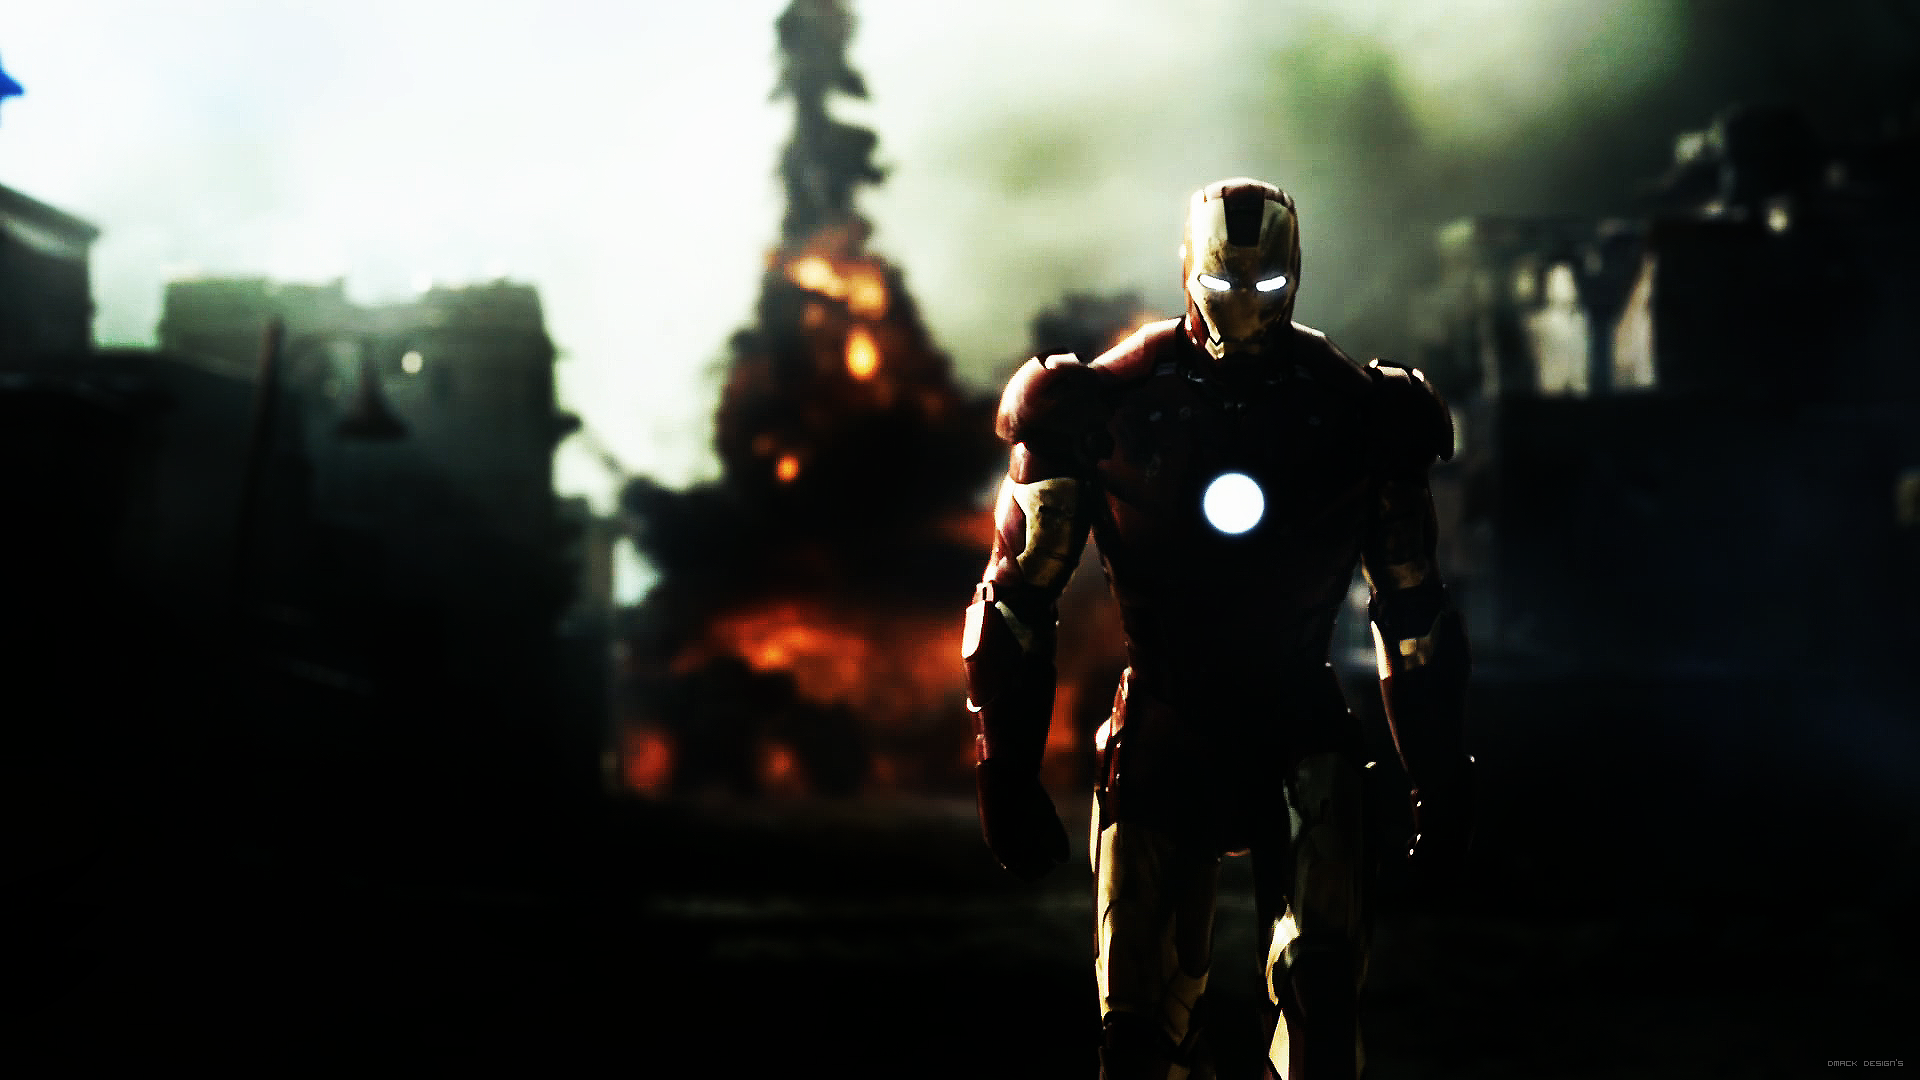 Ironman | Ironman Images, Pictures, Wallpapers on 7.TH